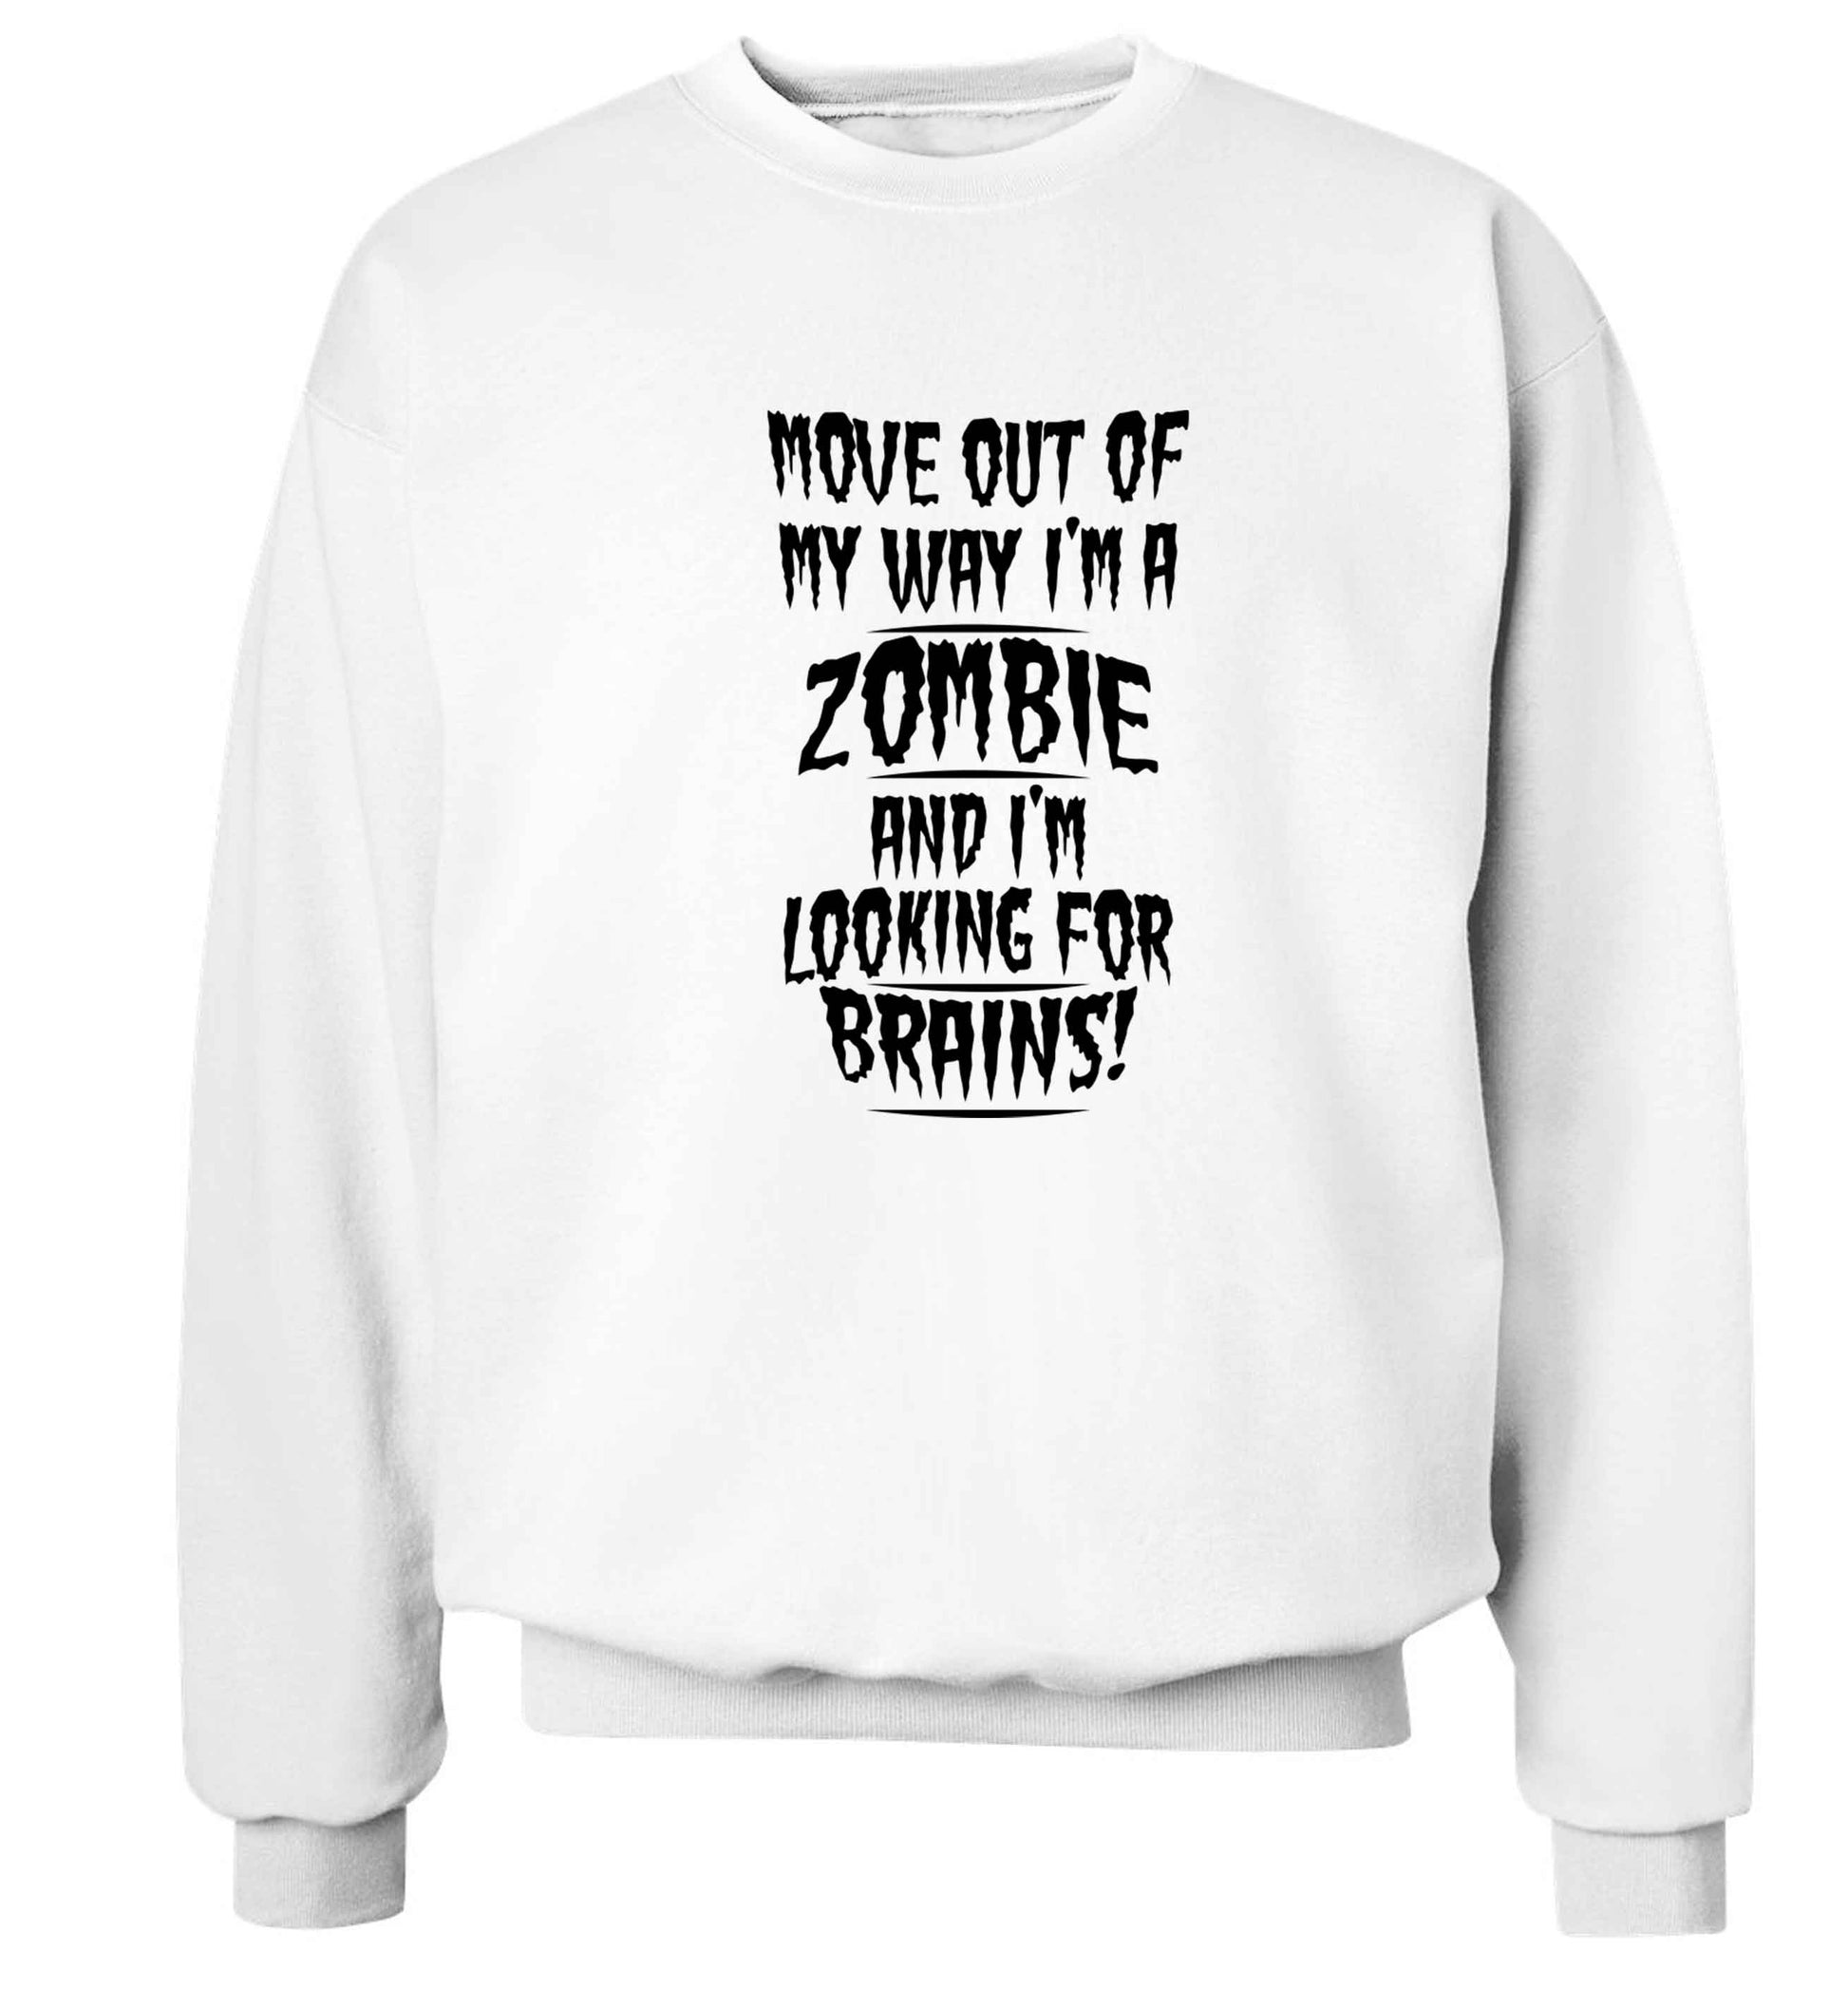 I'm a zombie and I'm looking for brains! Adult's unisex white Sweater 2XL